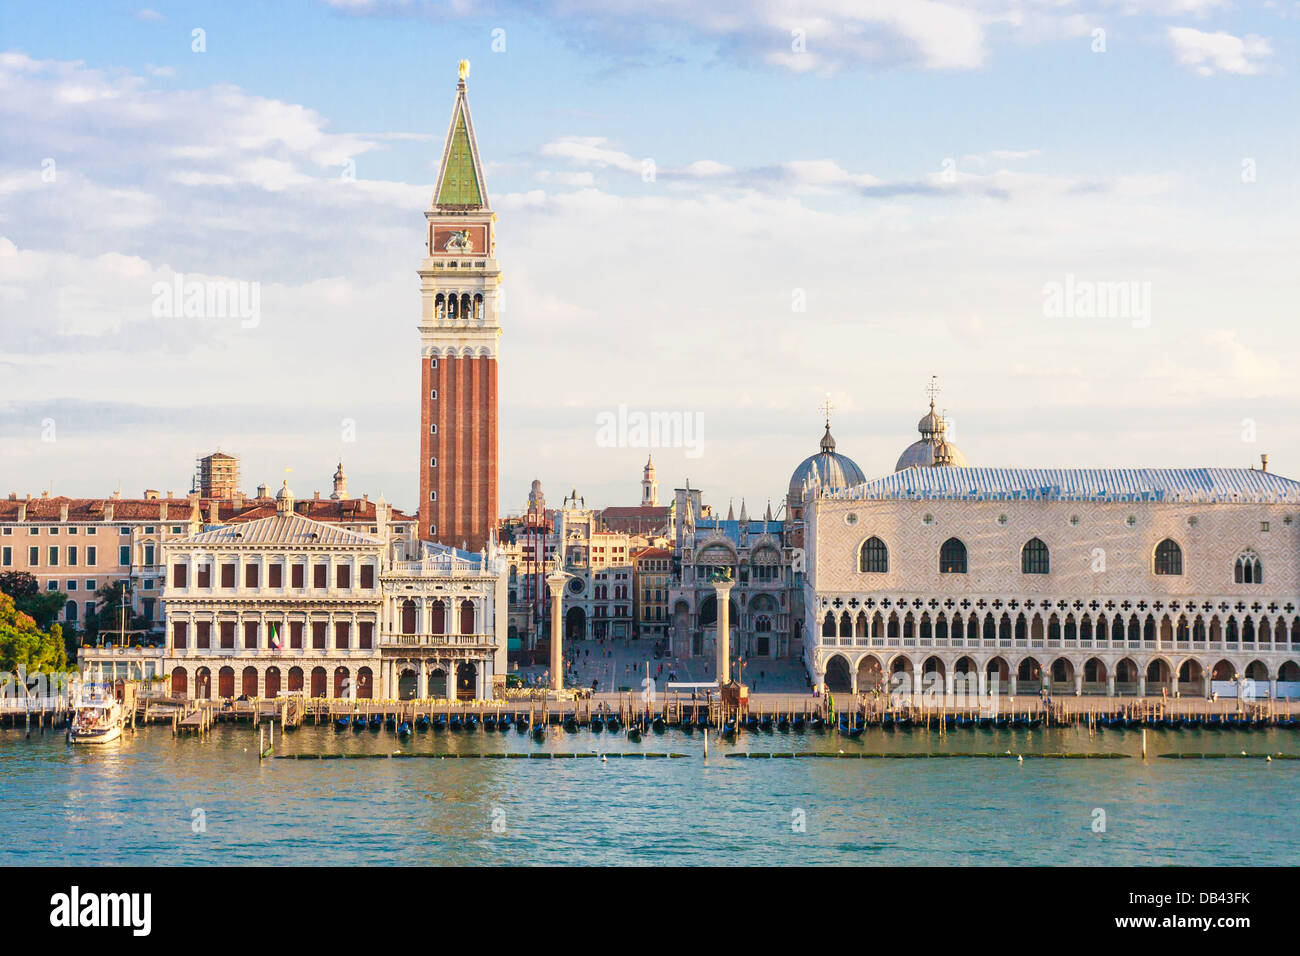 Venice, Italy - Piazza San Marco in the morning Stock Photo